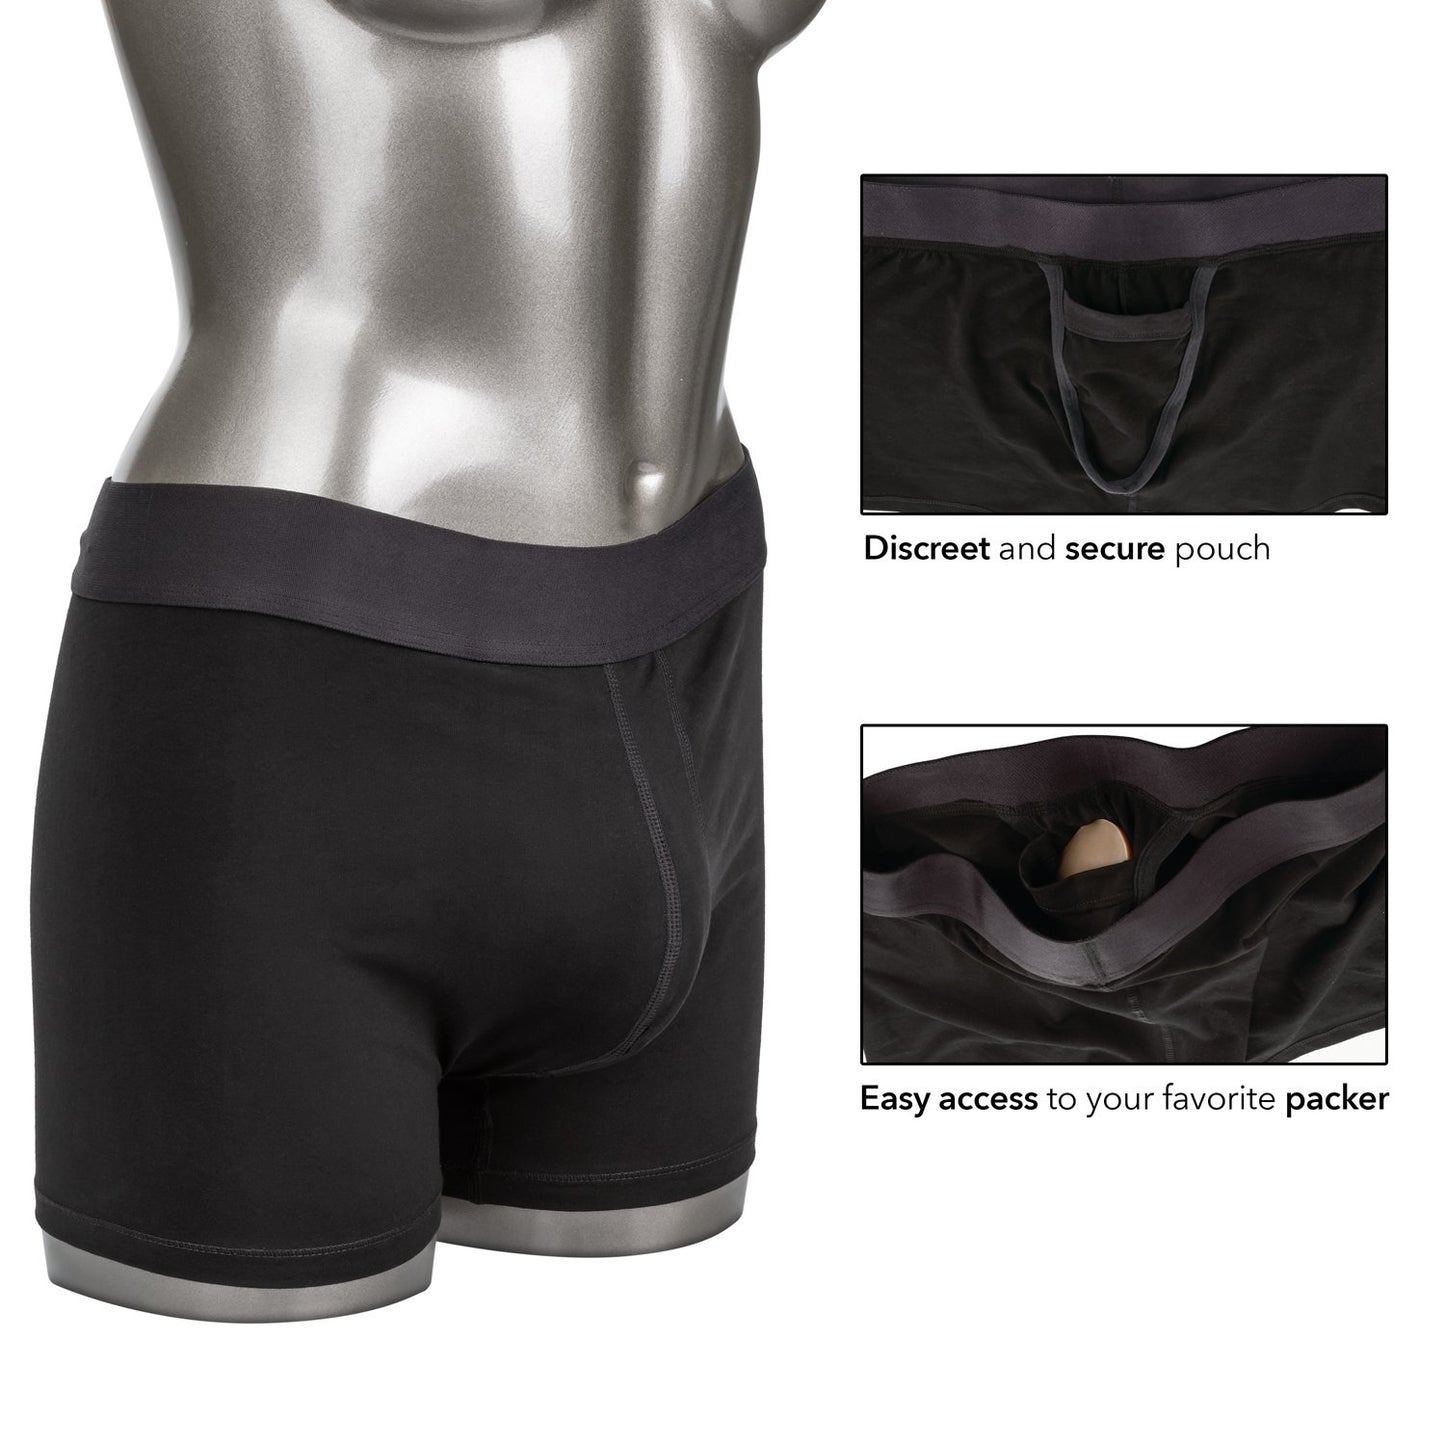 Packer Gear Boxer Brief with Packing Pouch - 2XL/3XL